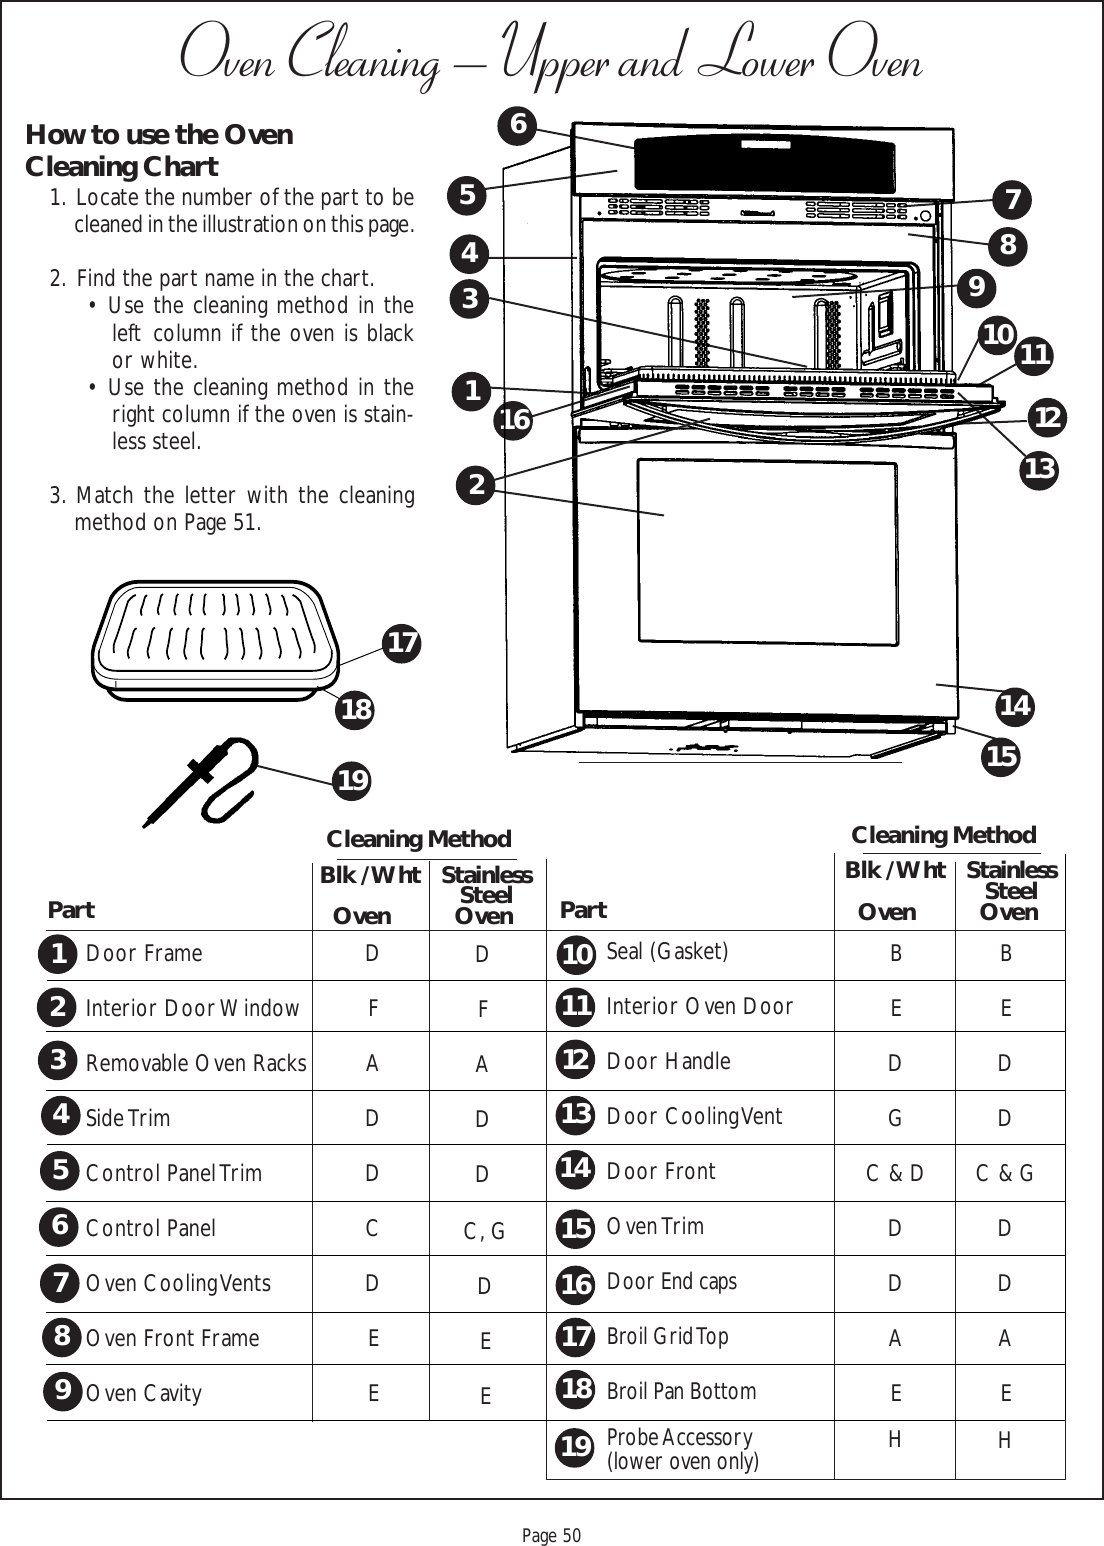 Proof 9-21-99Page 501718Oven Cleaning – Upper and Lower OvenHow to use the OvenCleaning Chart1.  Locate the number of the part to becleaned in the illustration on this page.2.  Find the part name in the chart.• Use the cleaning method in theleft column if the oven is blackor white.• Use the cleaning method in theright column if the oven is stain-less steel.3. Match the letter with the cleaningmethod on Page 51.3876512410 1112131415169BEDGC &amp; DDDAEHBEDDC &amp; GDDAEHDFADDCDEESeal (Gasket)Interior Oven DoorDoor HandleDoor Cooling VentDoor FrontOven TrimDoor End capsBroil Grid TopBroil Pan BottomProbe Accessory(lower oven only)   Cleaning MethodBlk / Wht StainlessSteel    Oven          OvenDoor FrameInterior Door WindowRemovable Oven RacksSide TrimControl Panel TrimControl PanelOven Cooling VentsOven Front FrameOven CavityDFADDPart  PartC, GDEE   Cleaning MethodBlk / Wht StainlessSteel    Oven          Oven1234567891011121314151716181919